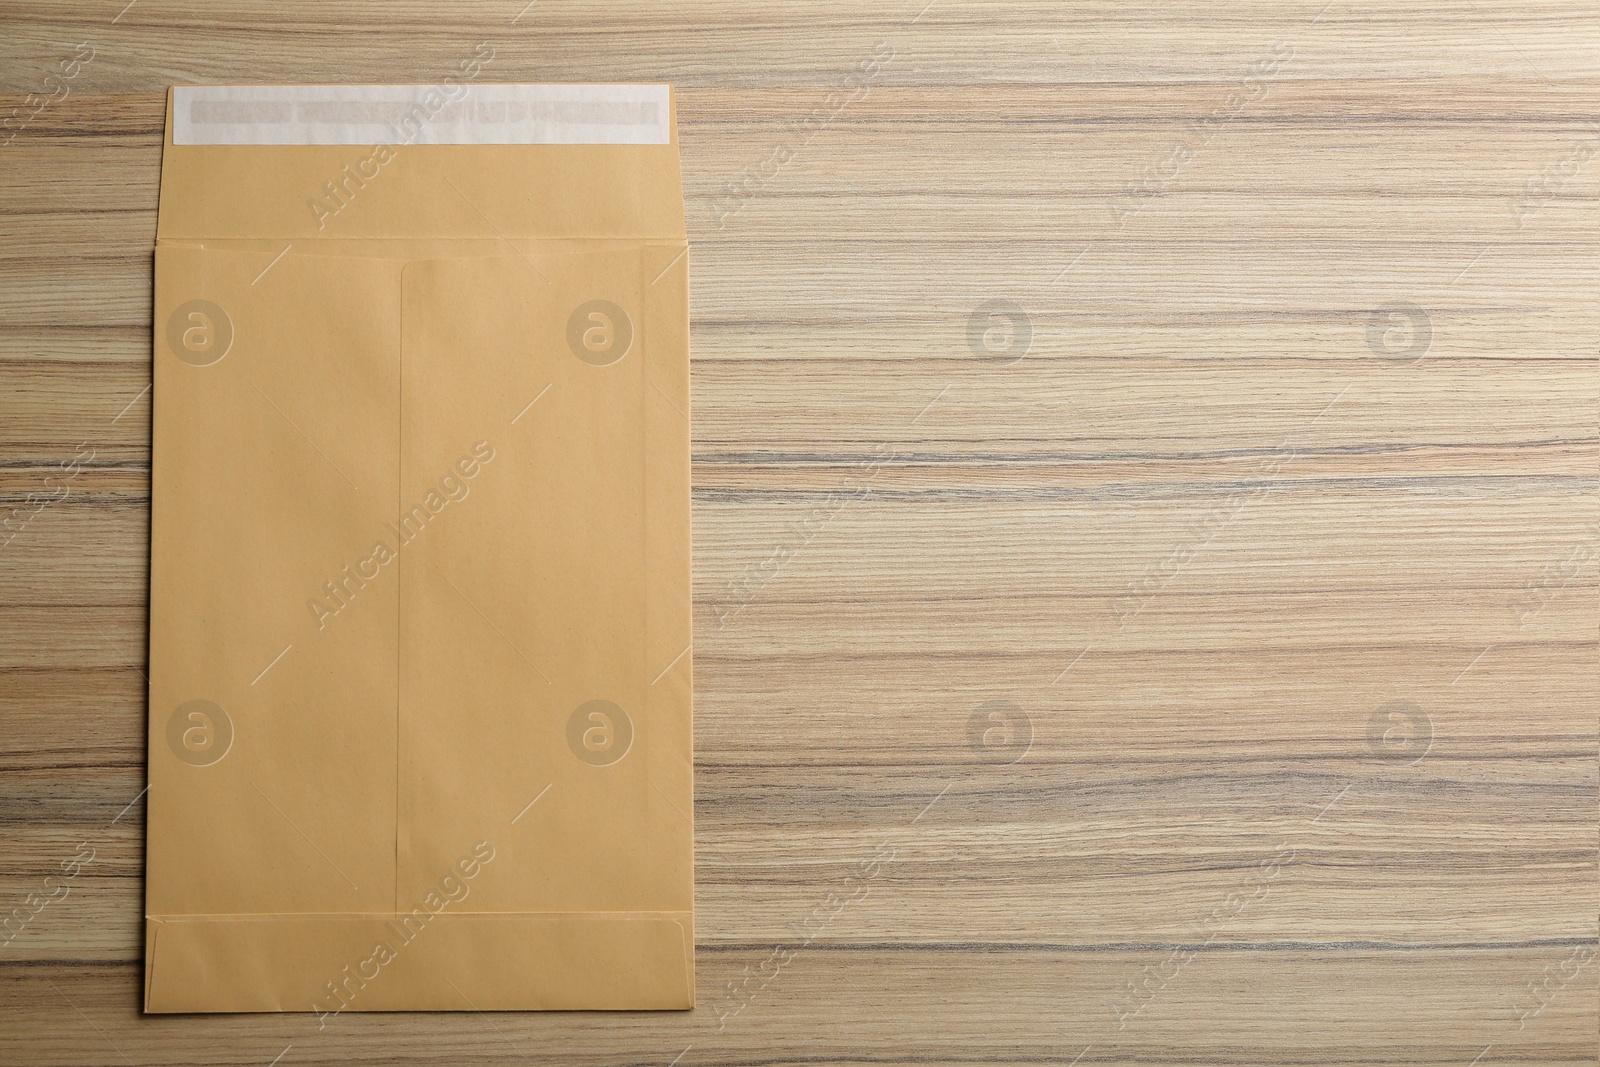 Photo of Kraft paper envelope on wooden background, top view. Space for text